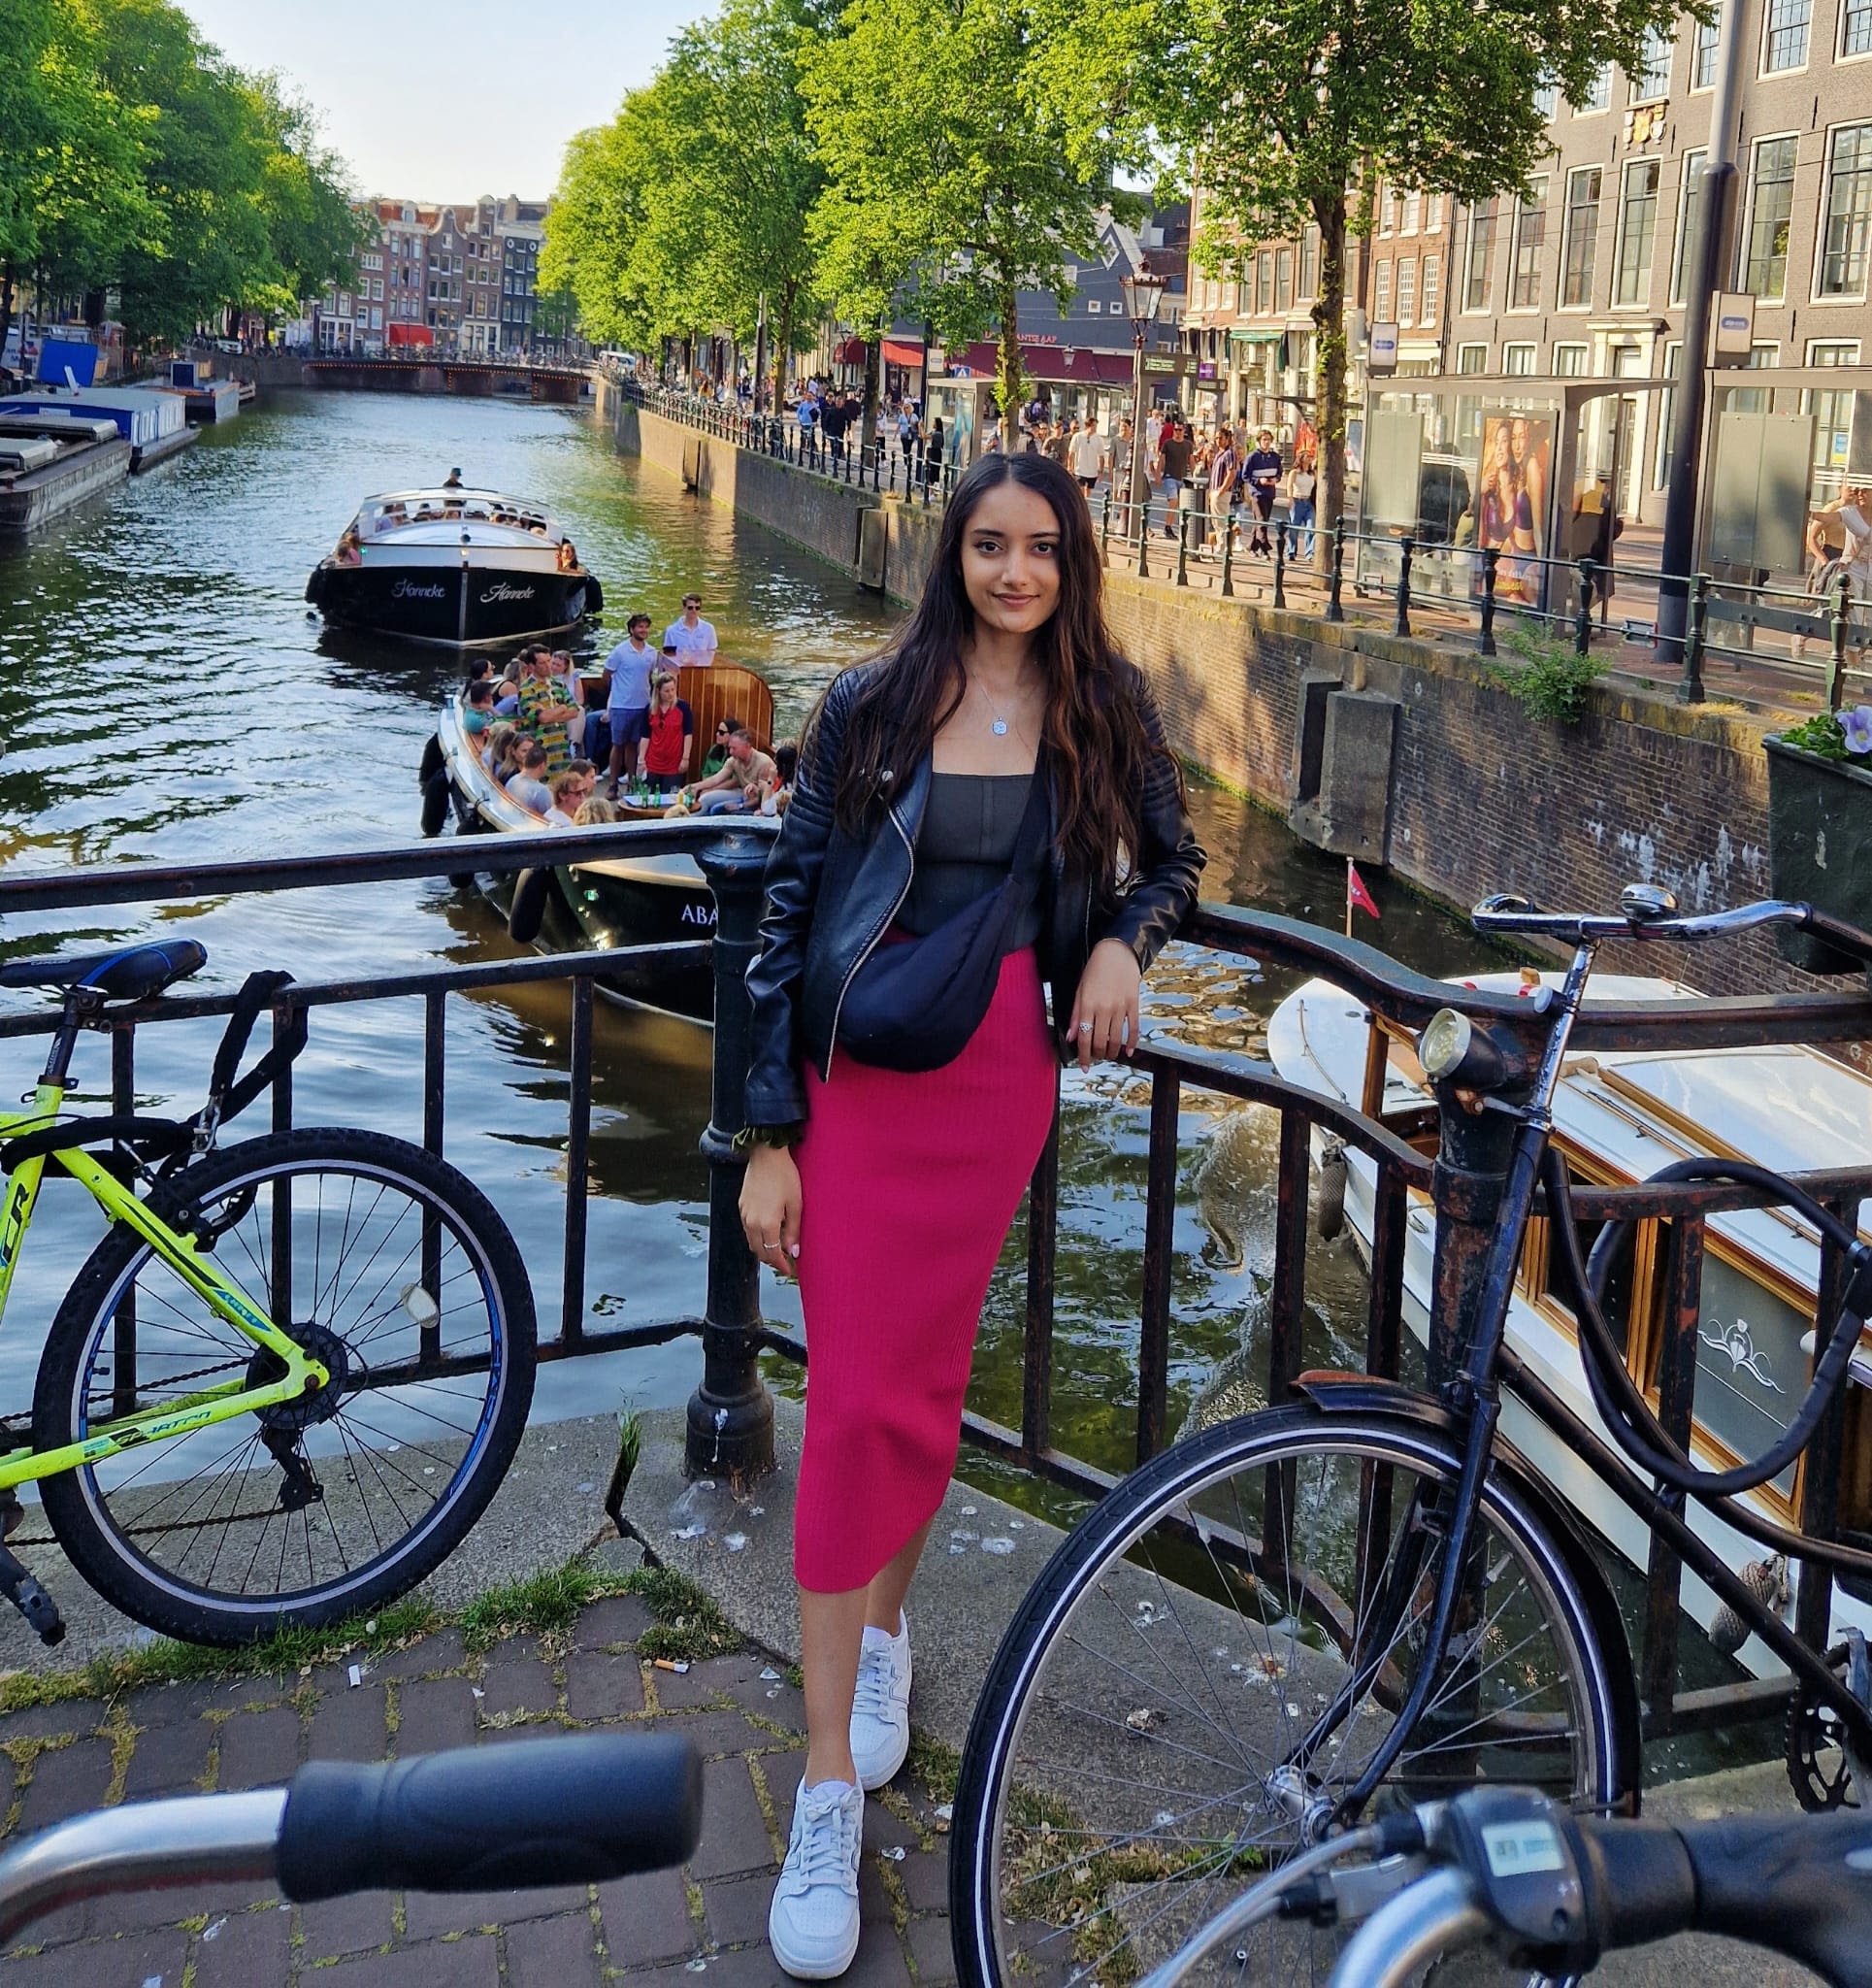 Aishwarya stood infront of a canal